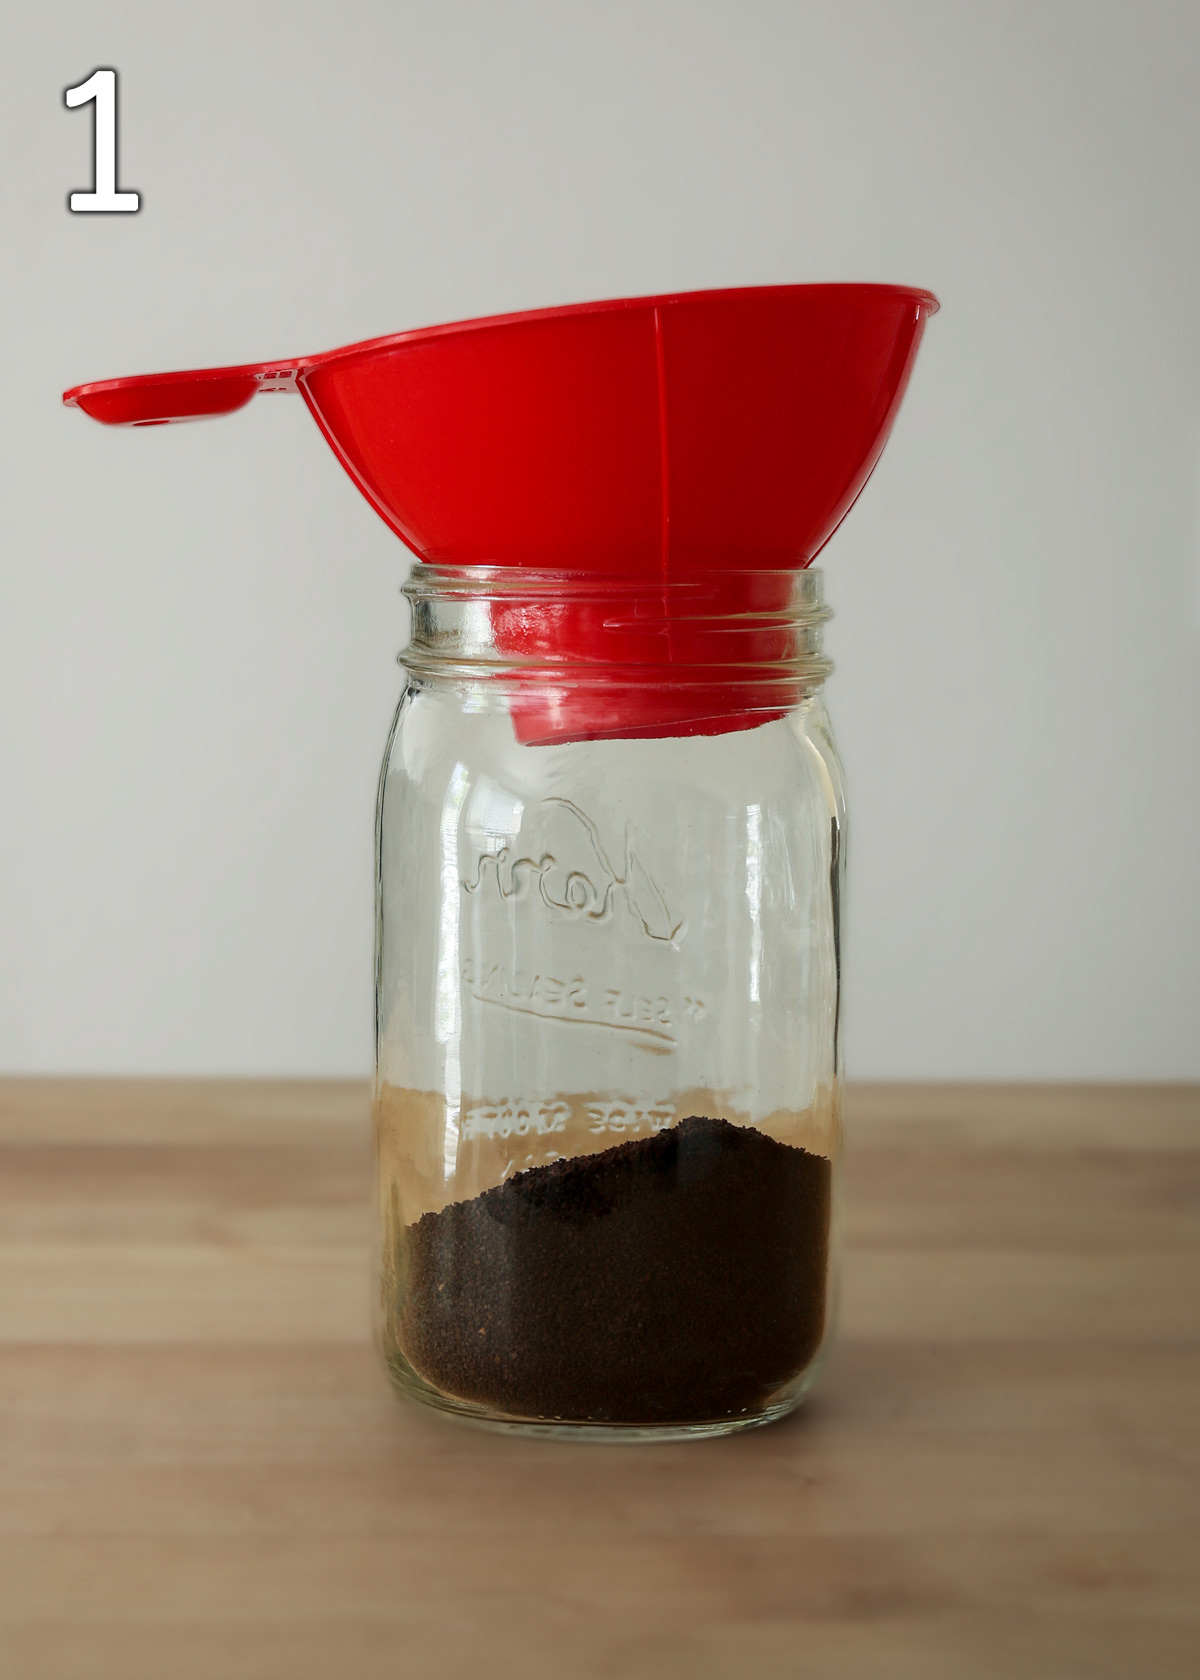 coffee grounds in glass jar with red wide mouth funnel.